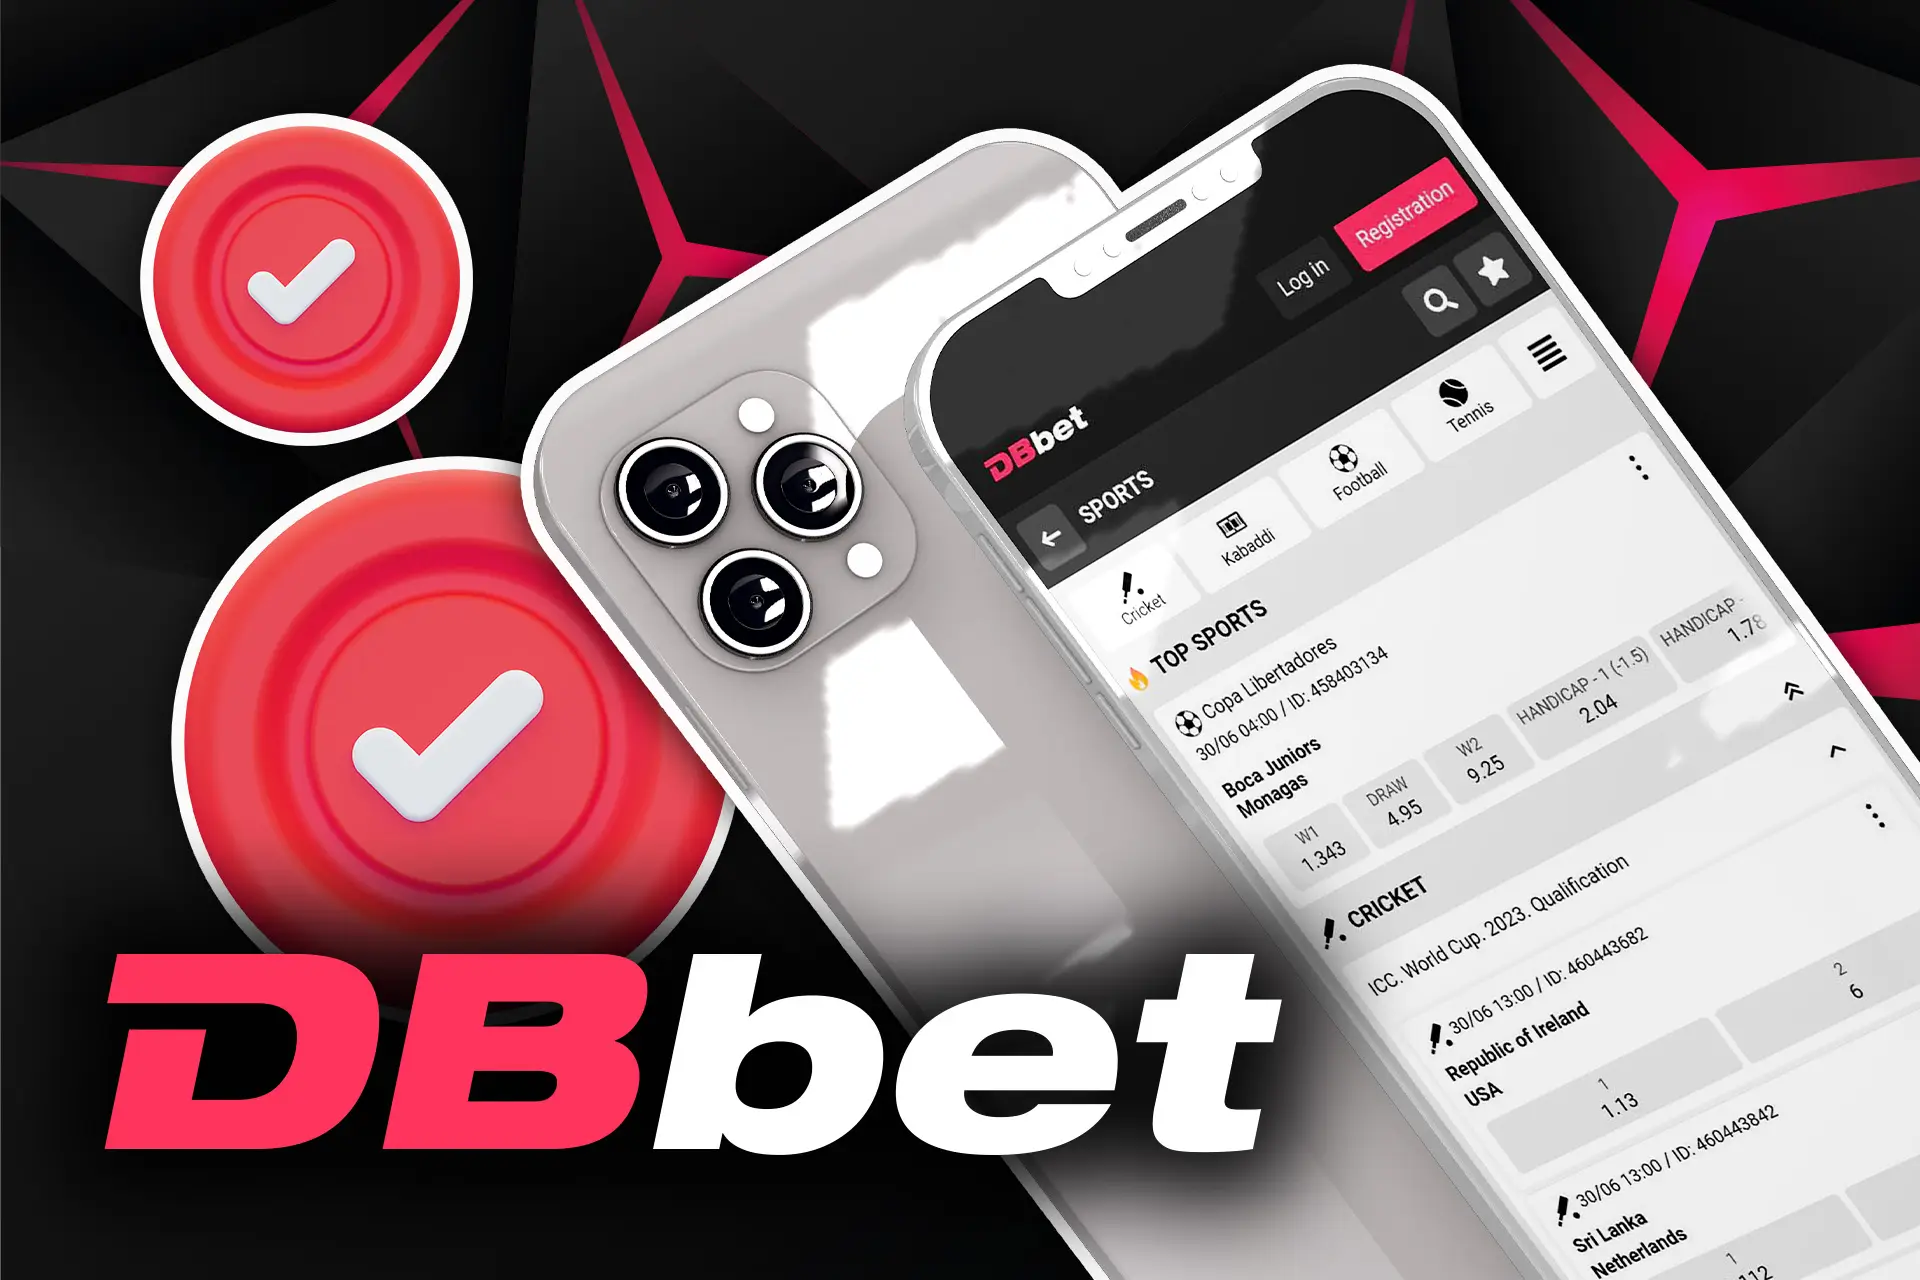 Play and bet in the DBbet app or on the website.